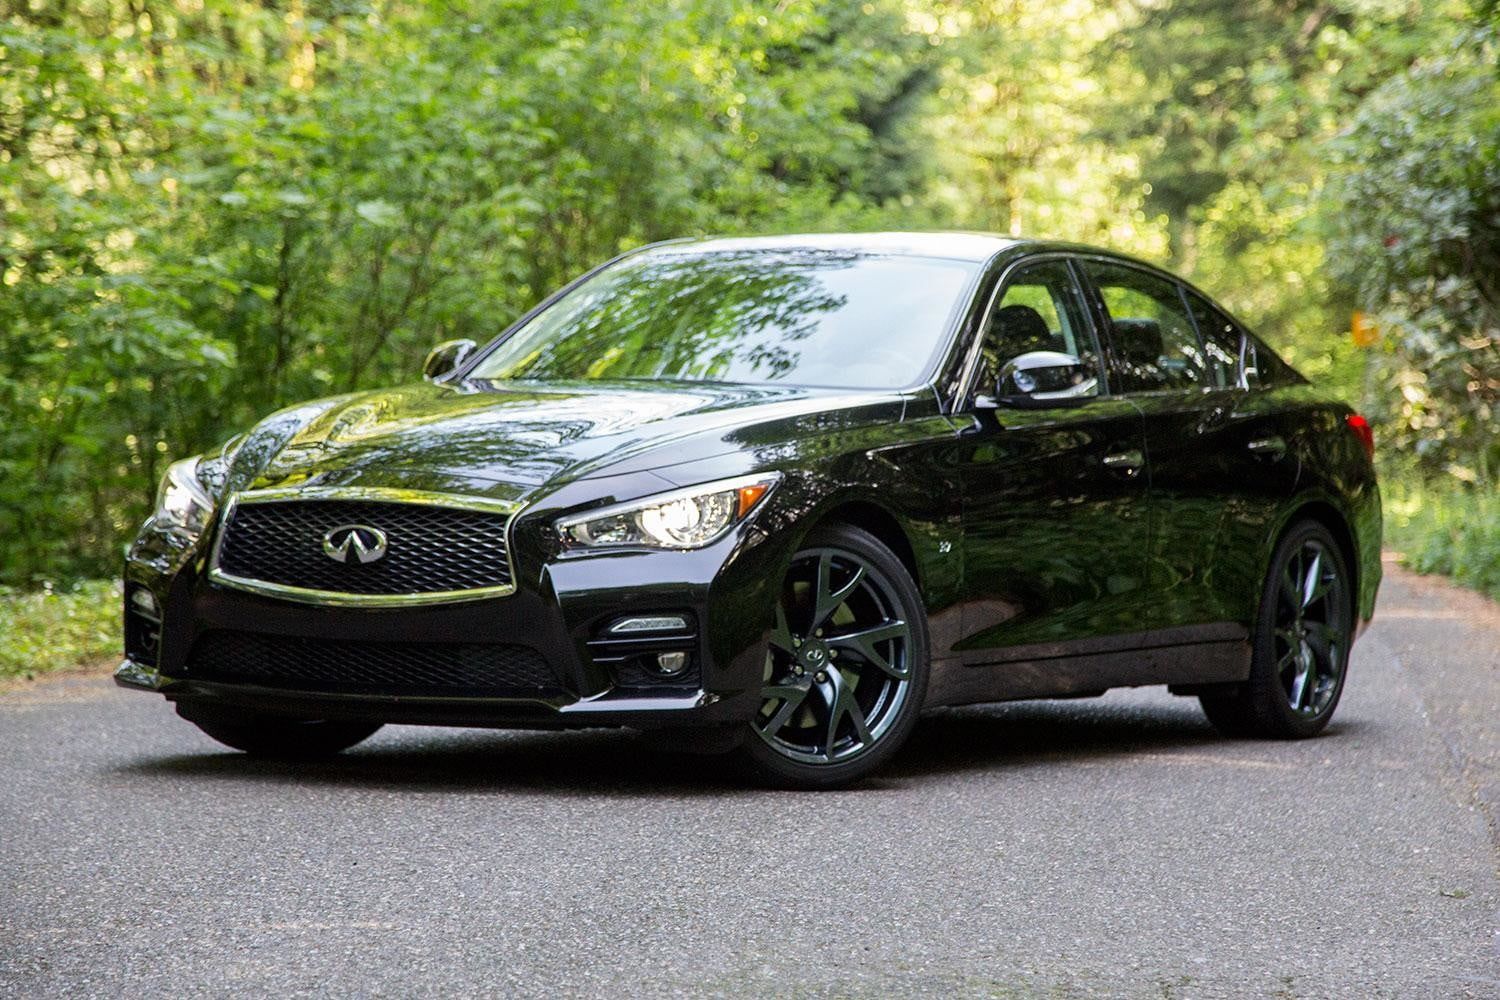 2014 Infiniti Q50 In Black Front View